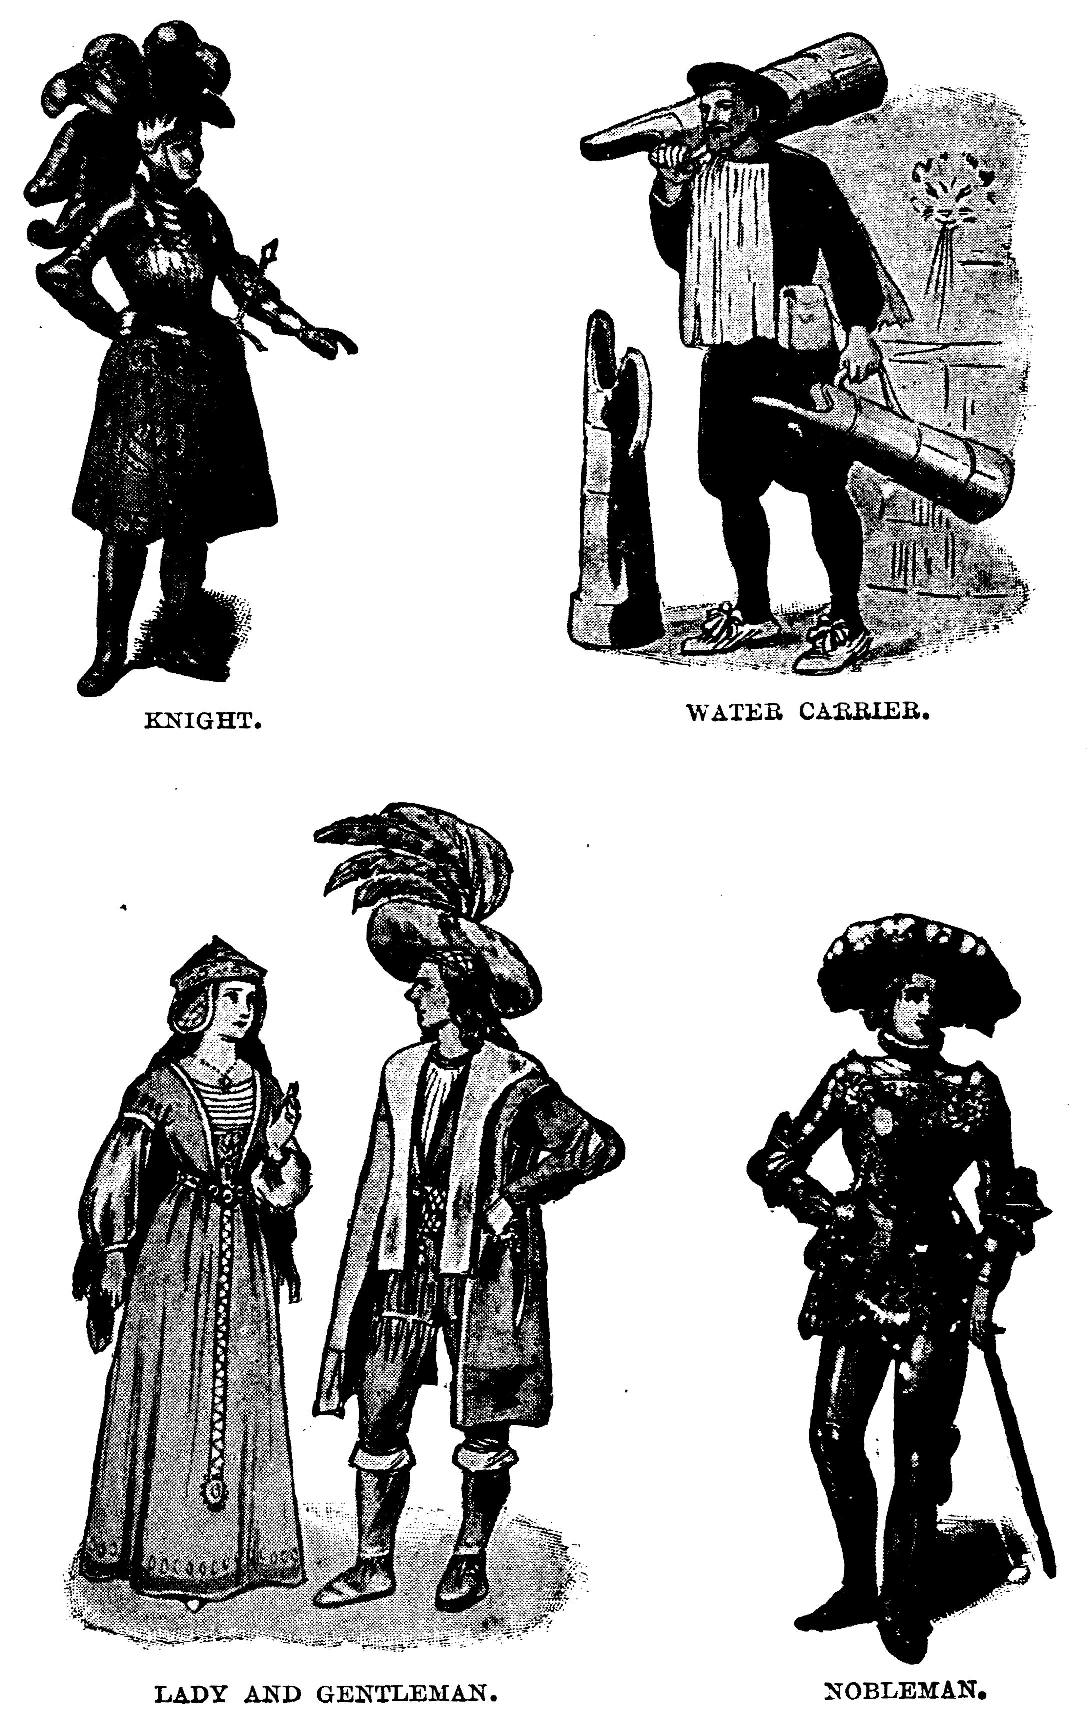 [Illustration] from Tudors and Stuarts by M. B. Synge